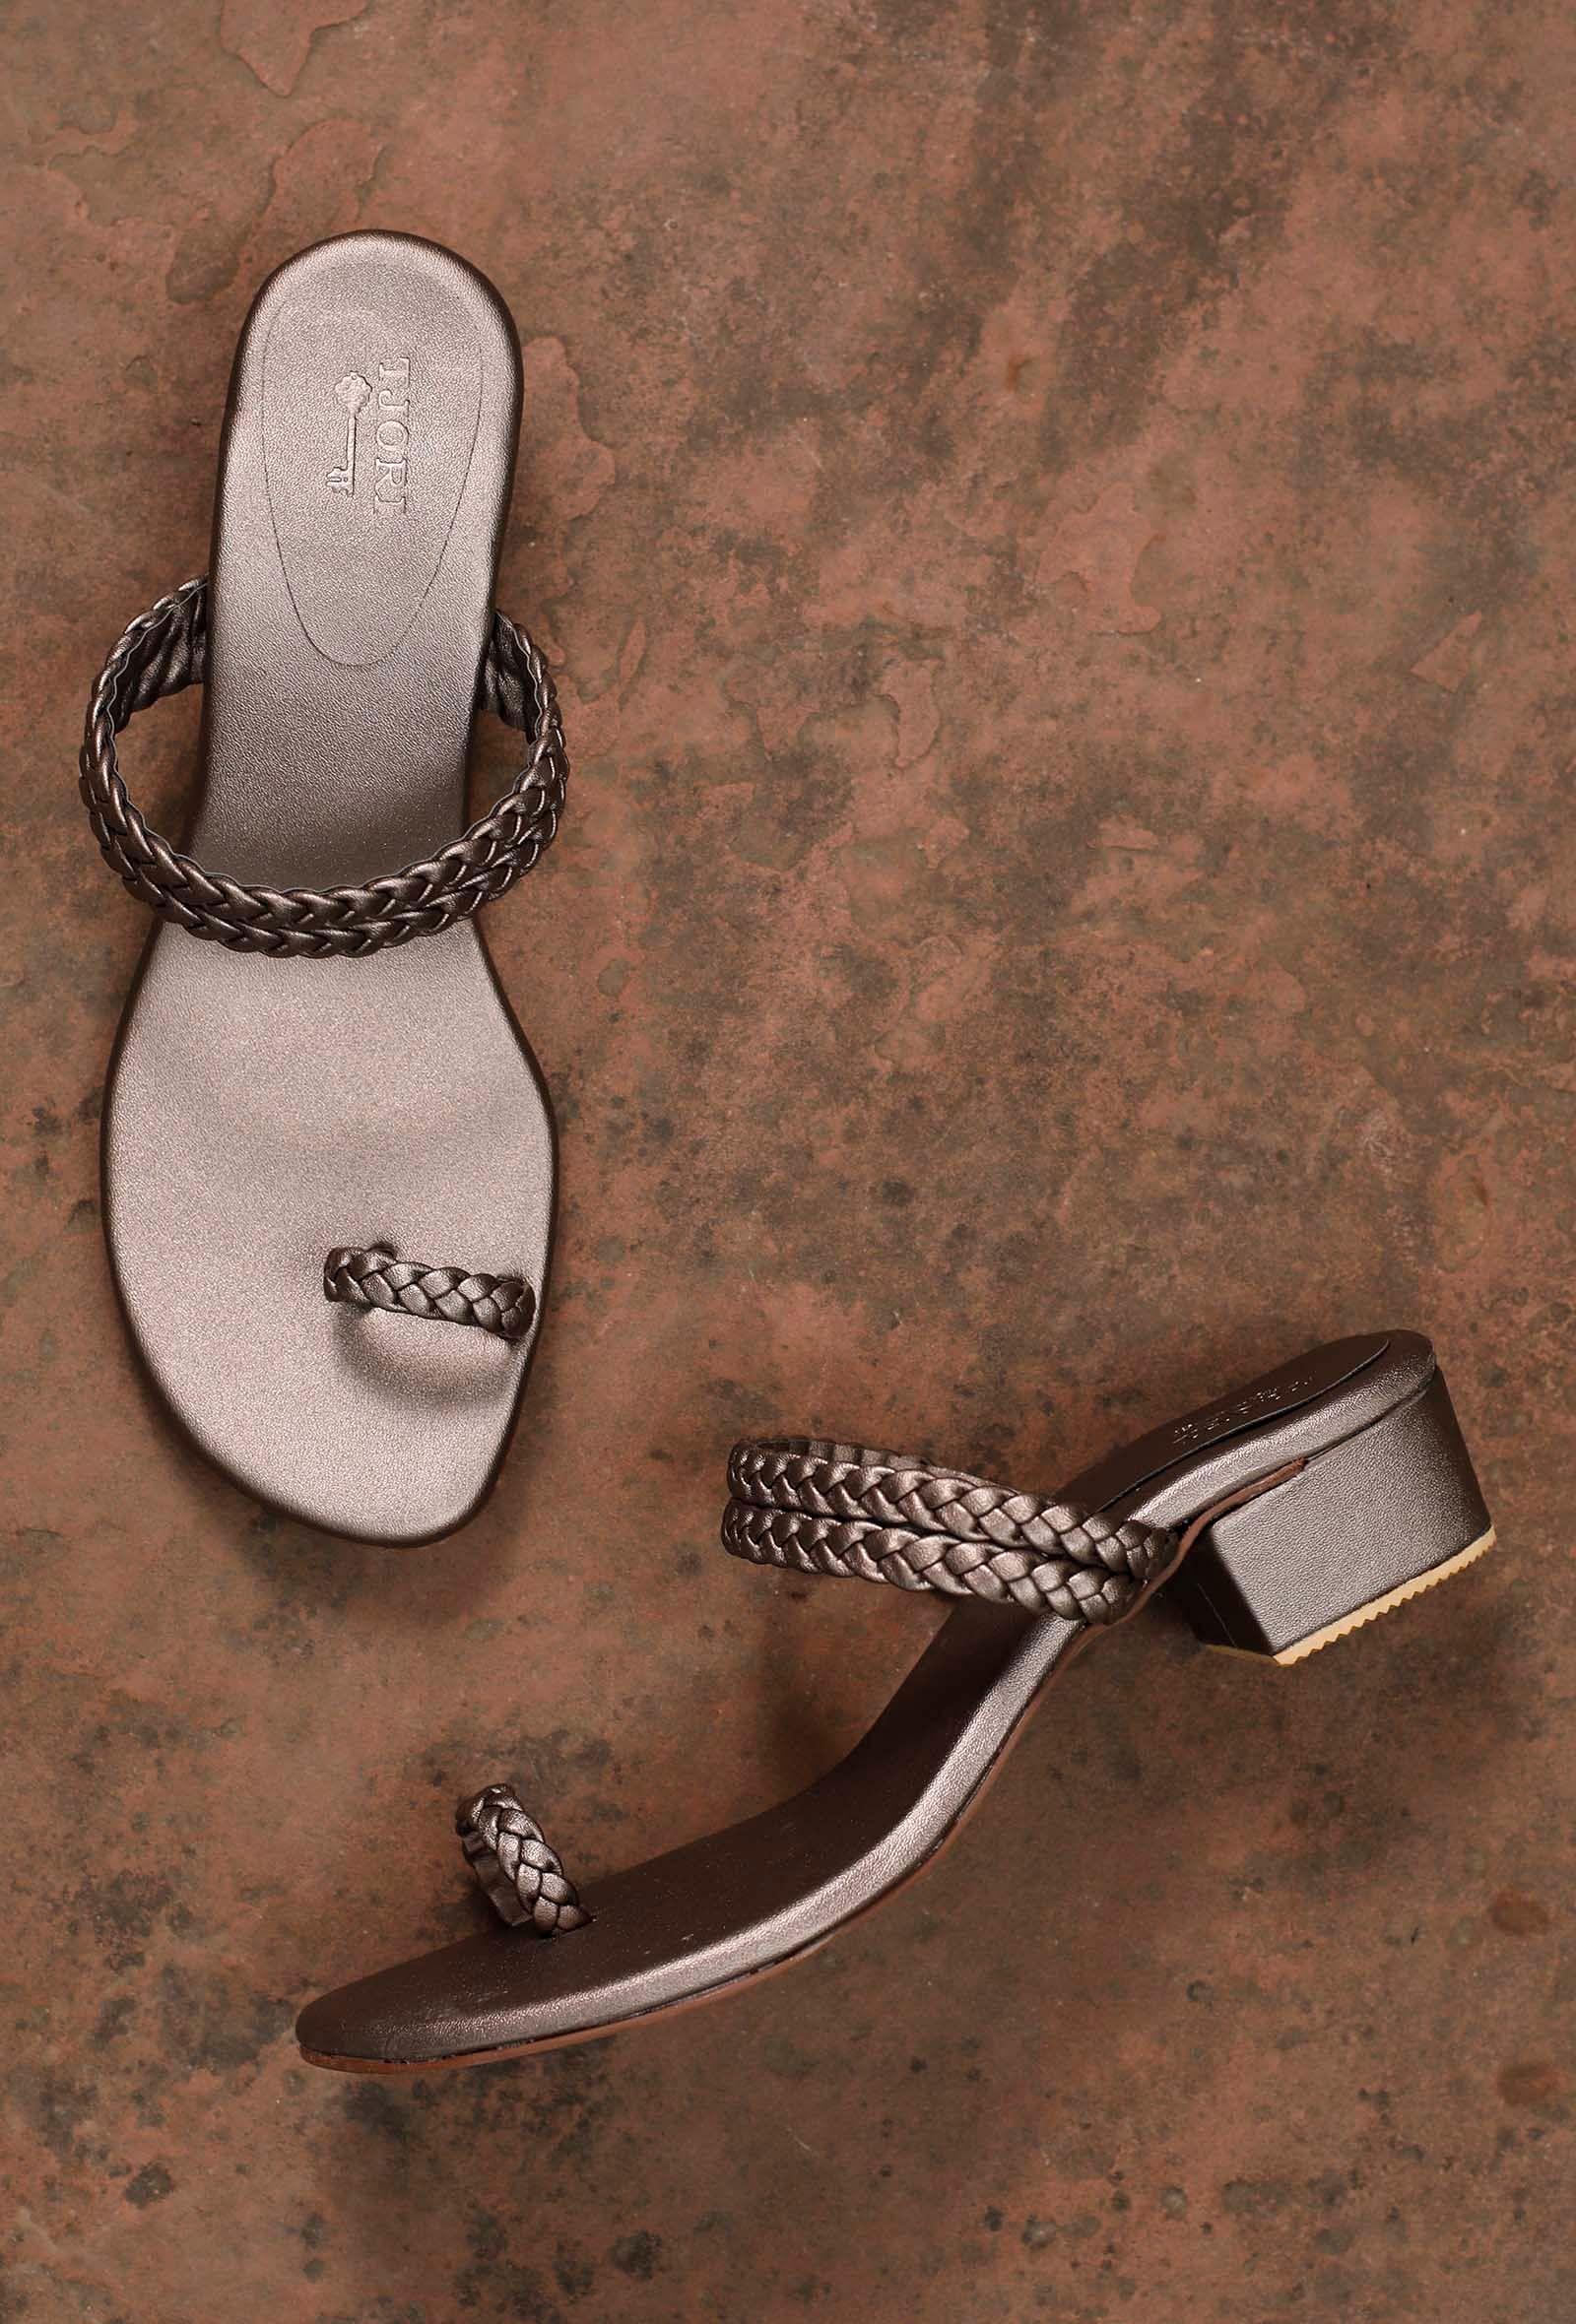 grey-knotted-cruelty-free-leather-sandals